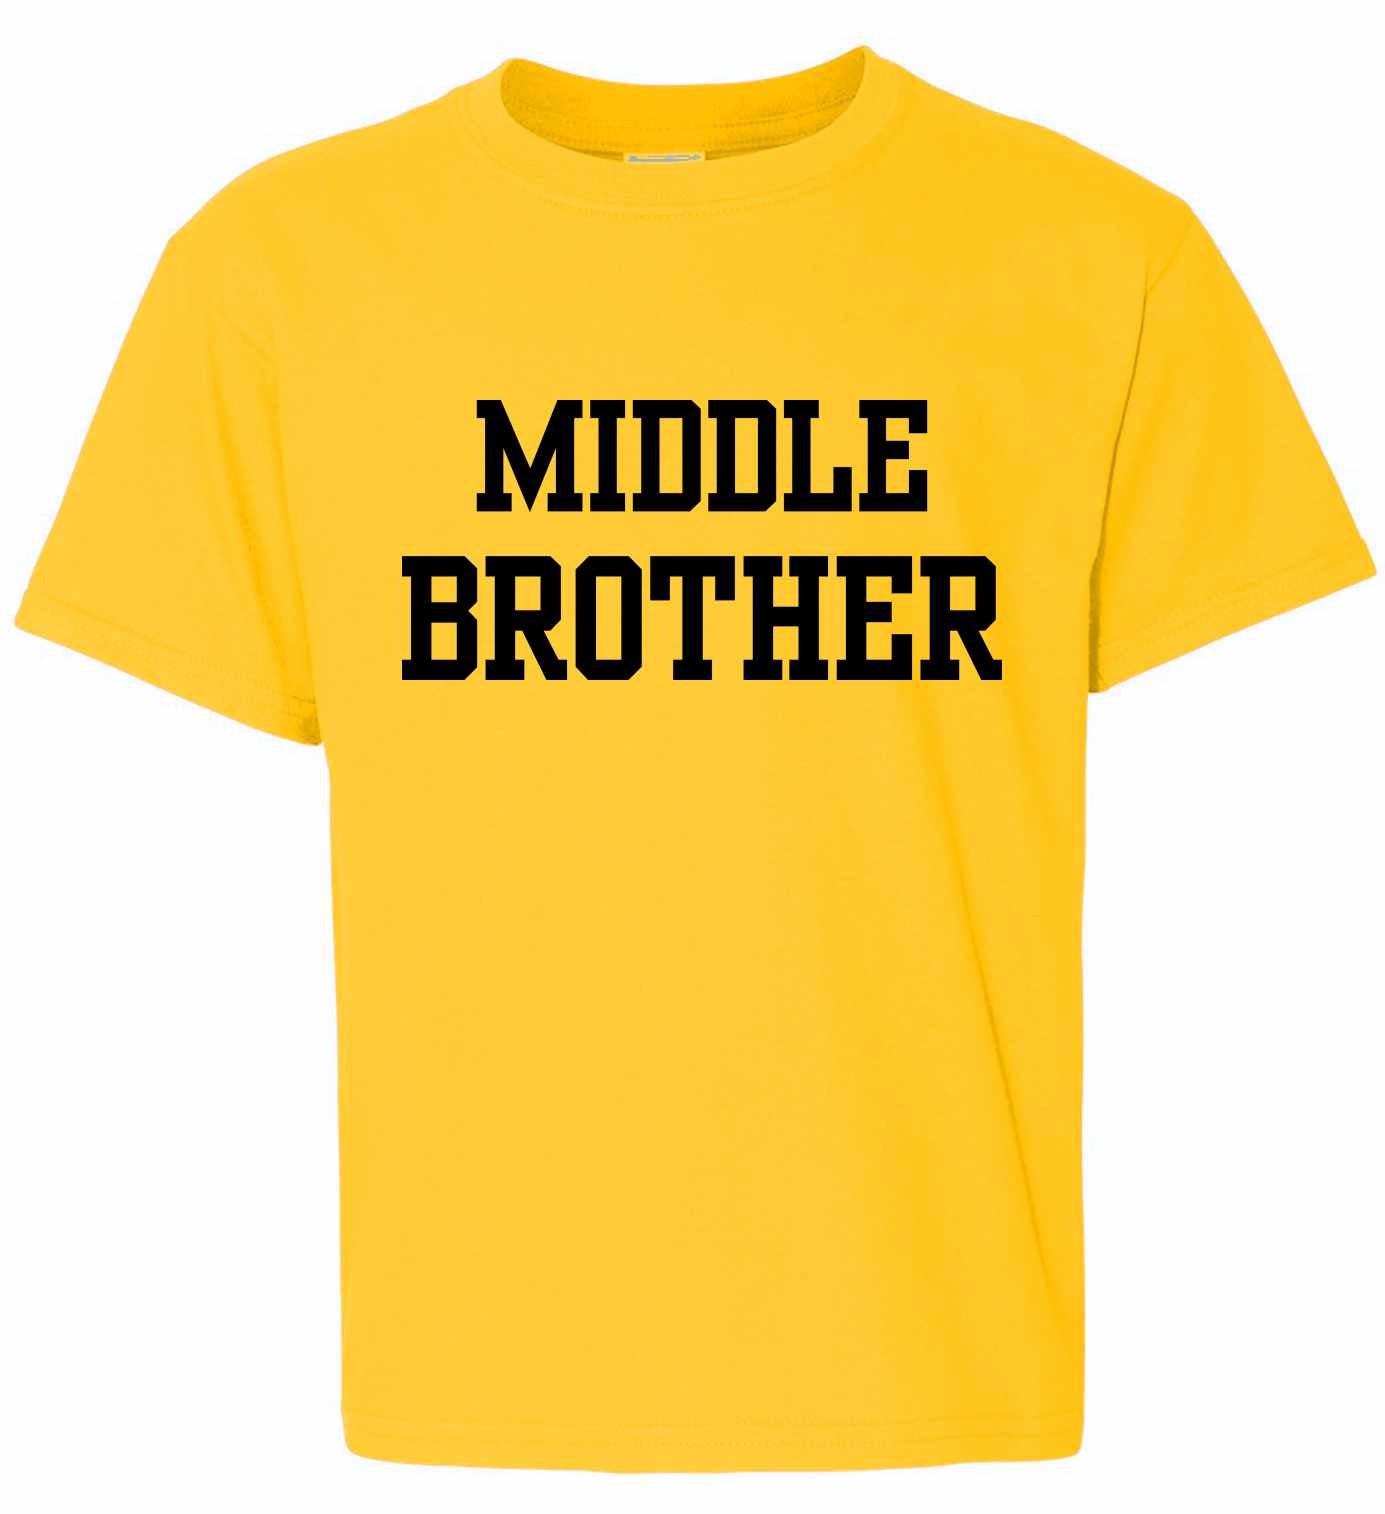 MIDDLE BROTHER on Kids T-Shirt